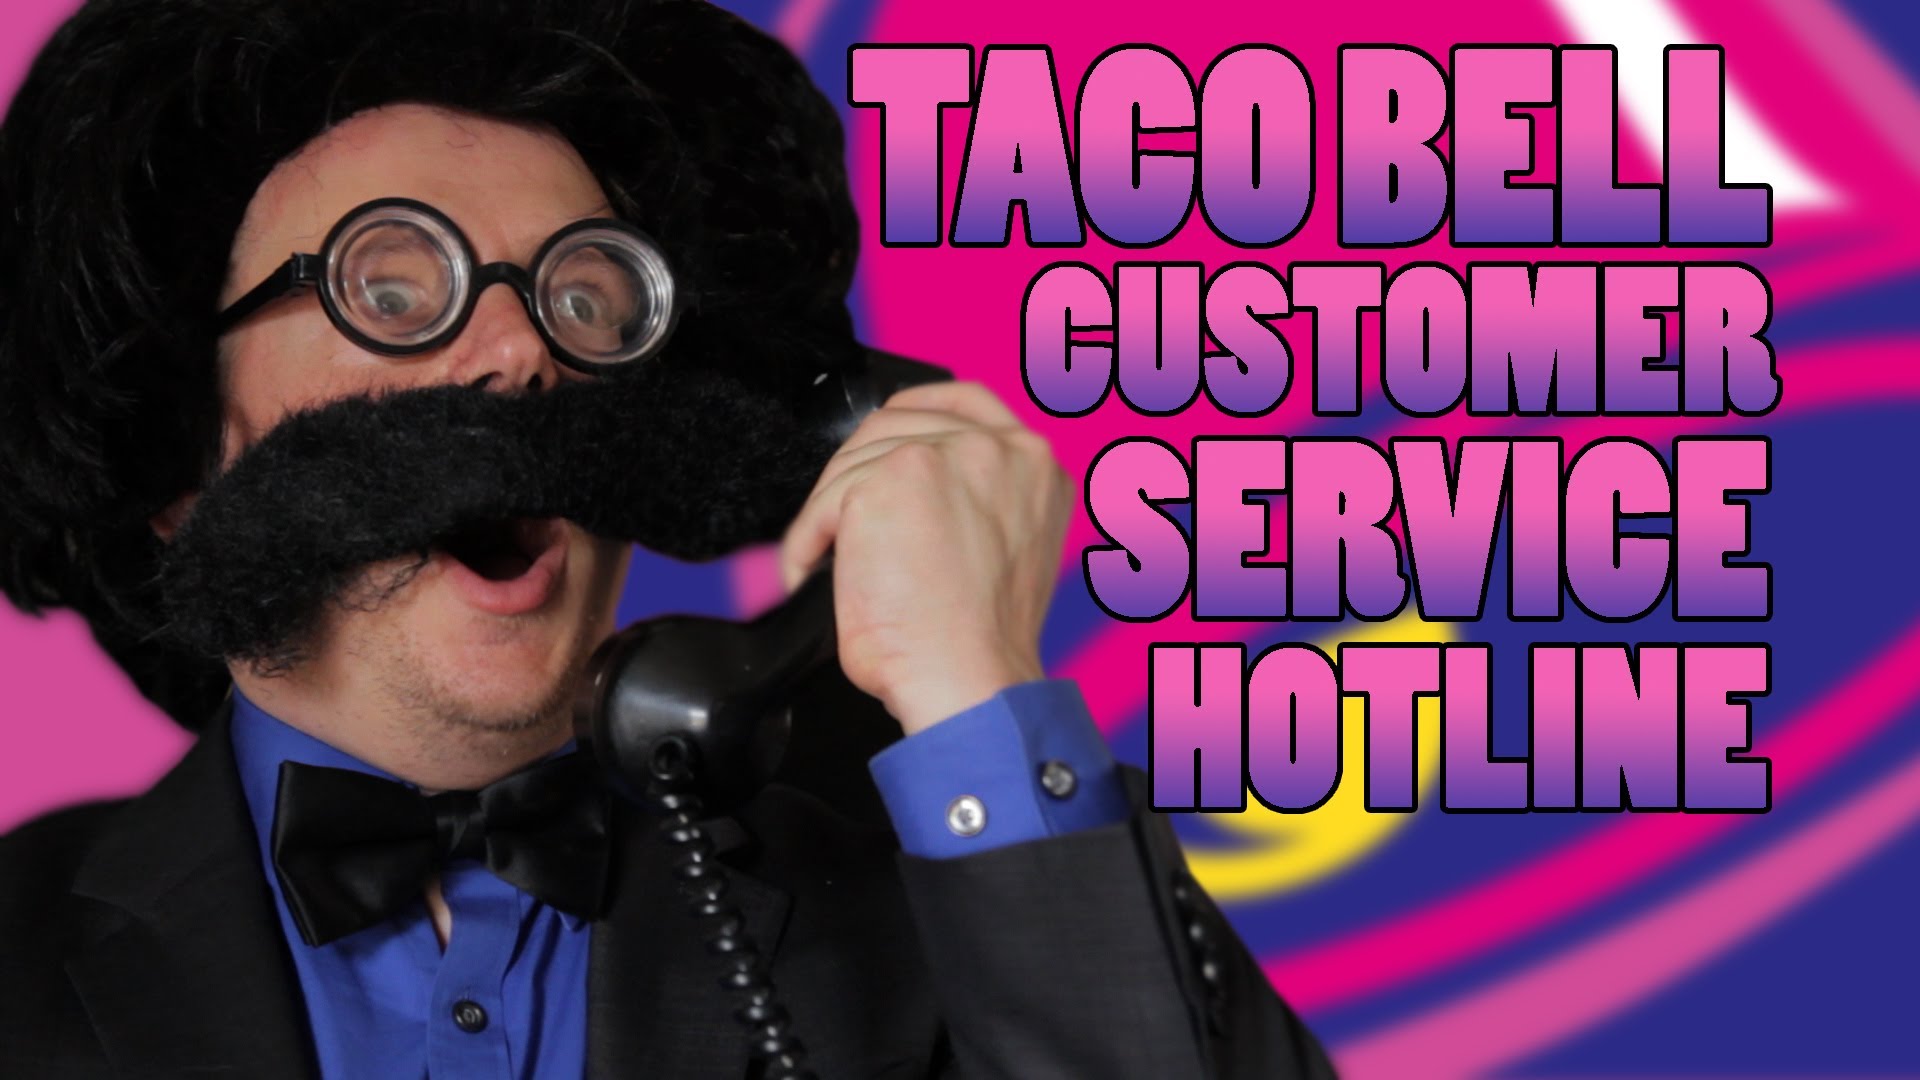 Taco Bell customer services Images